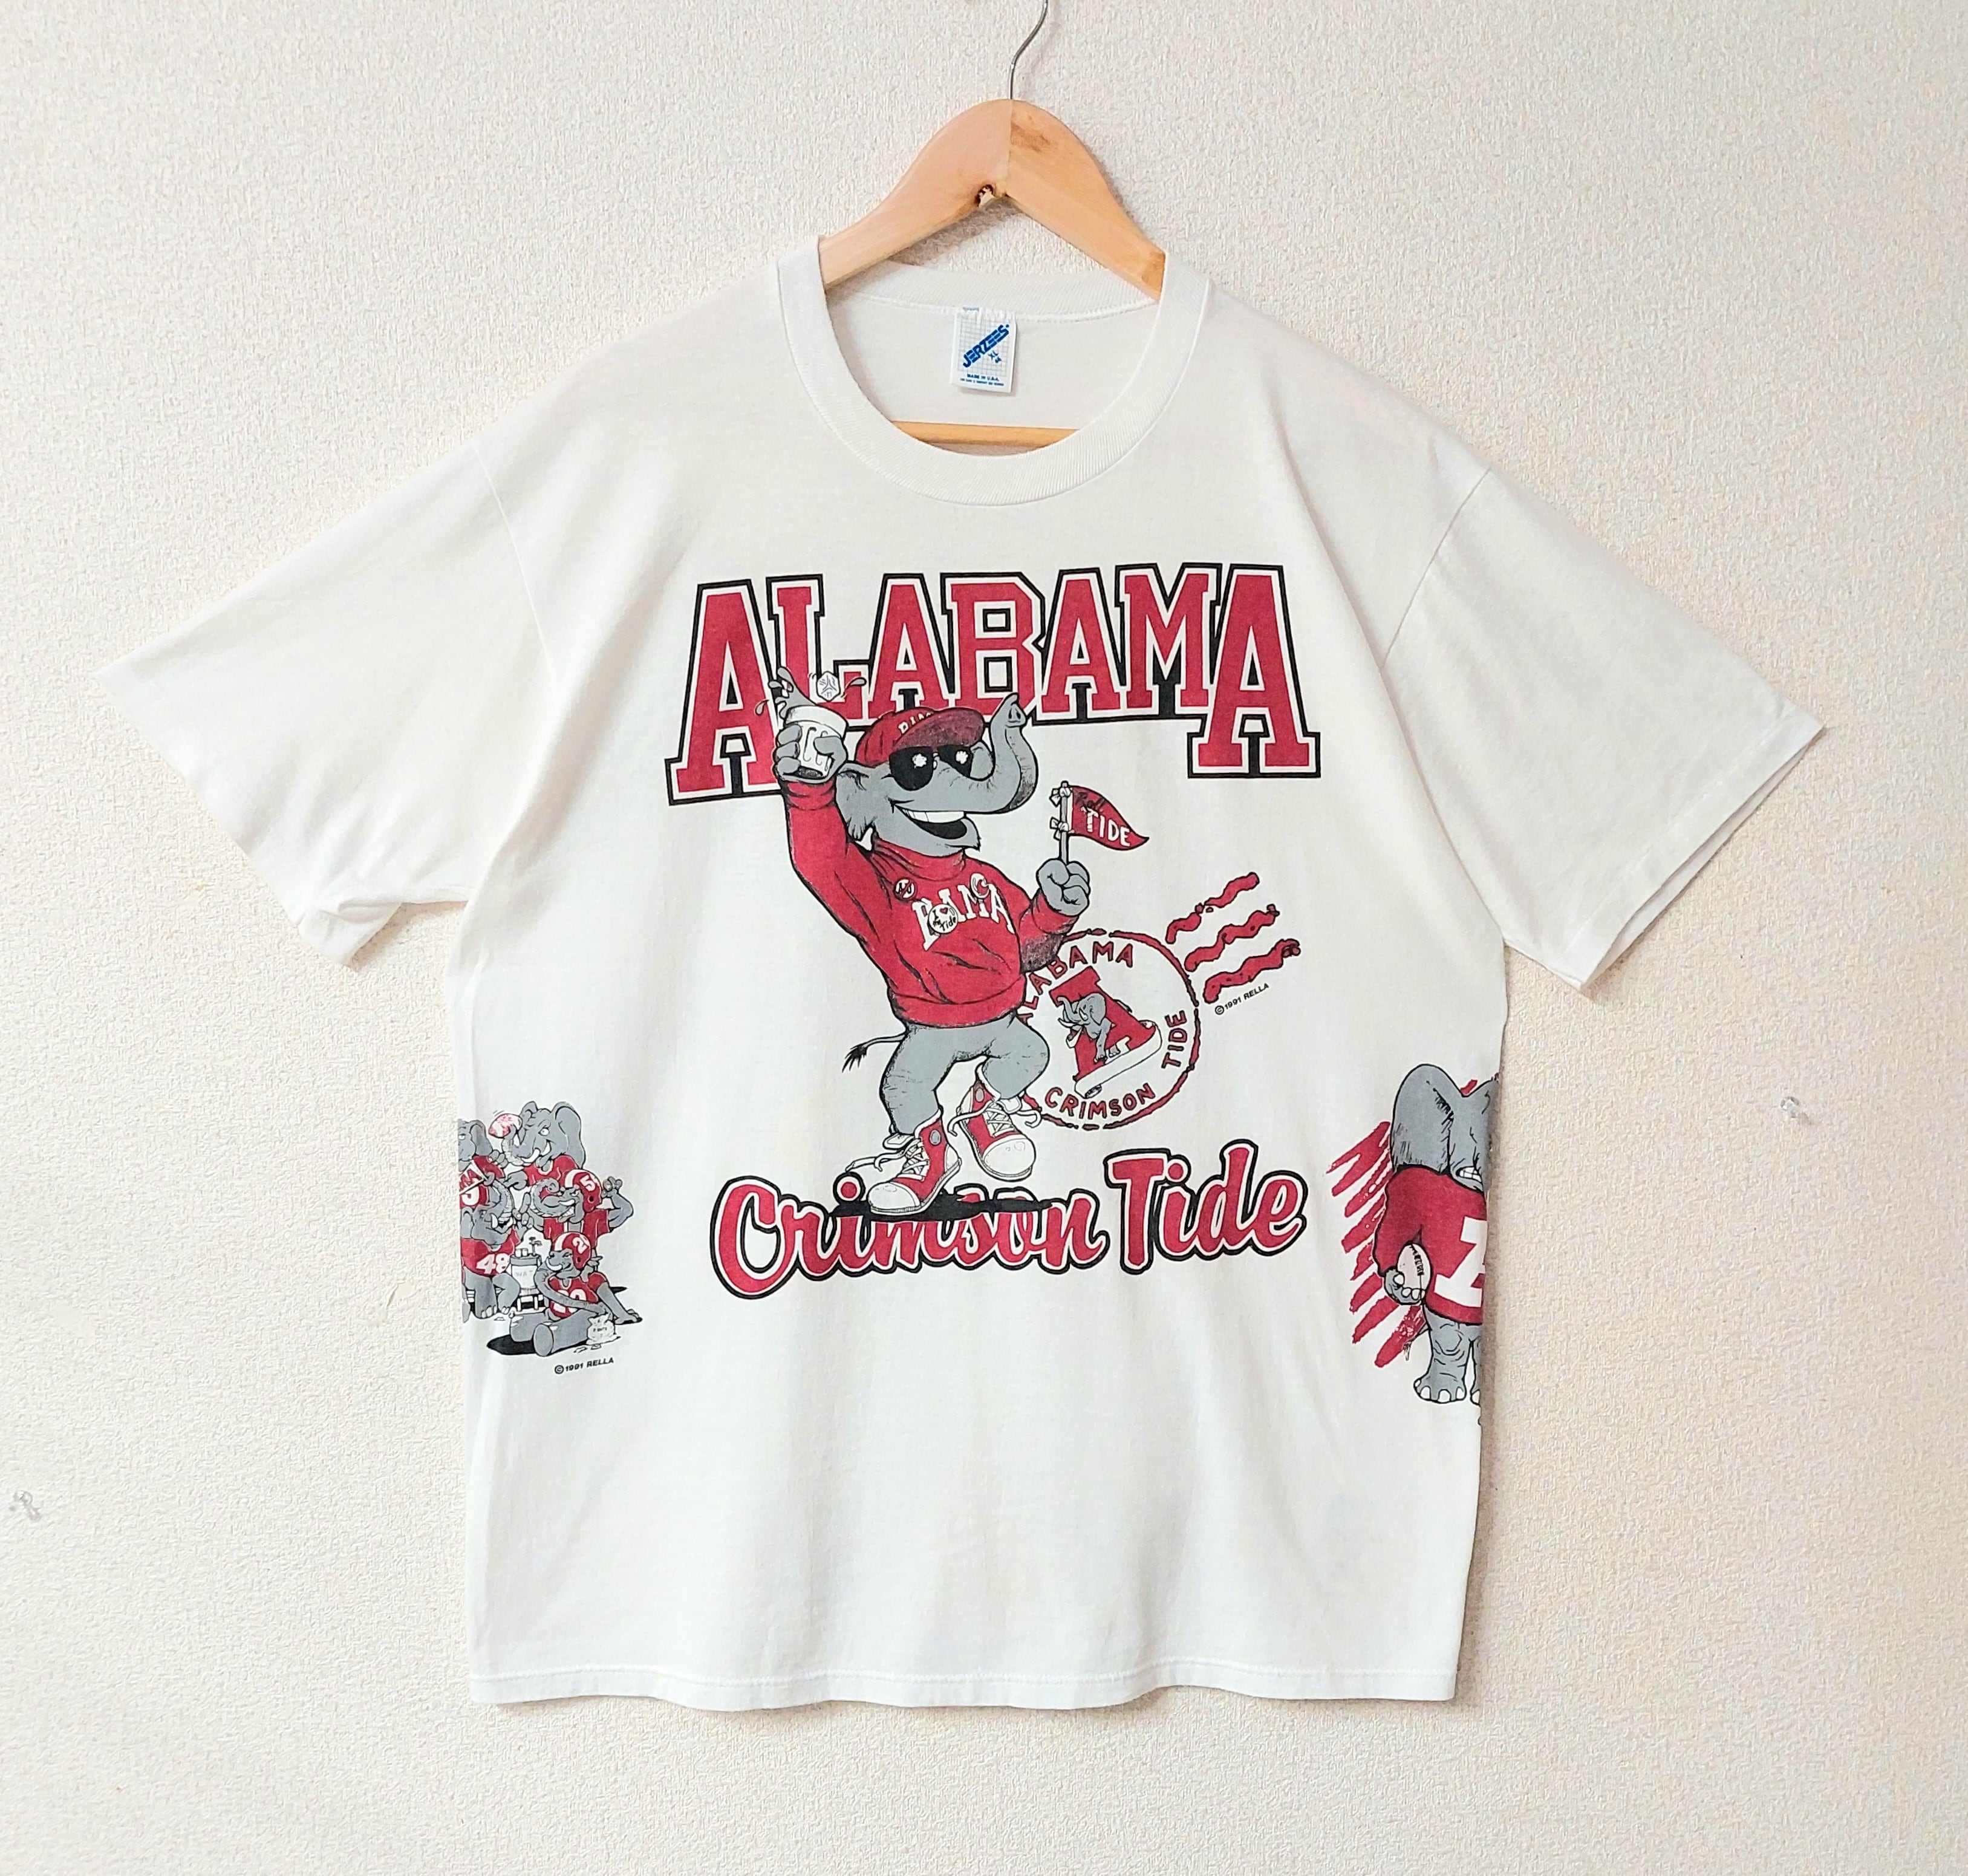 Mid-America Southern Style USA製 Tシャツ XL